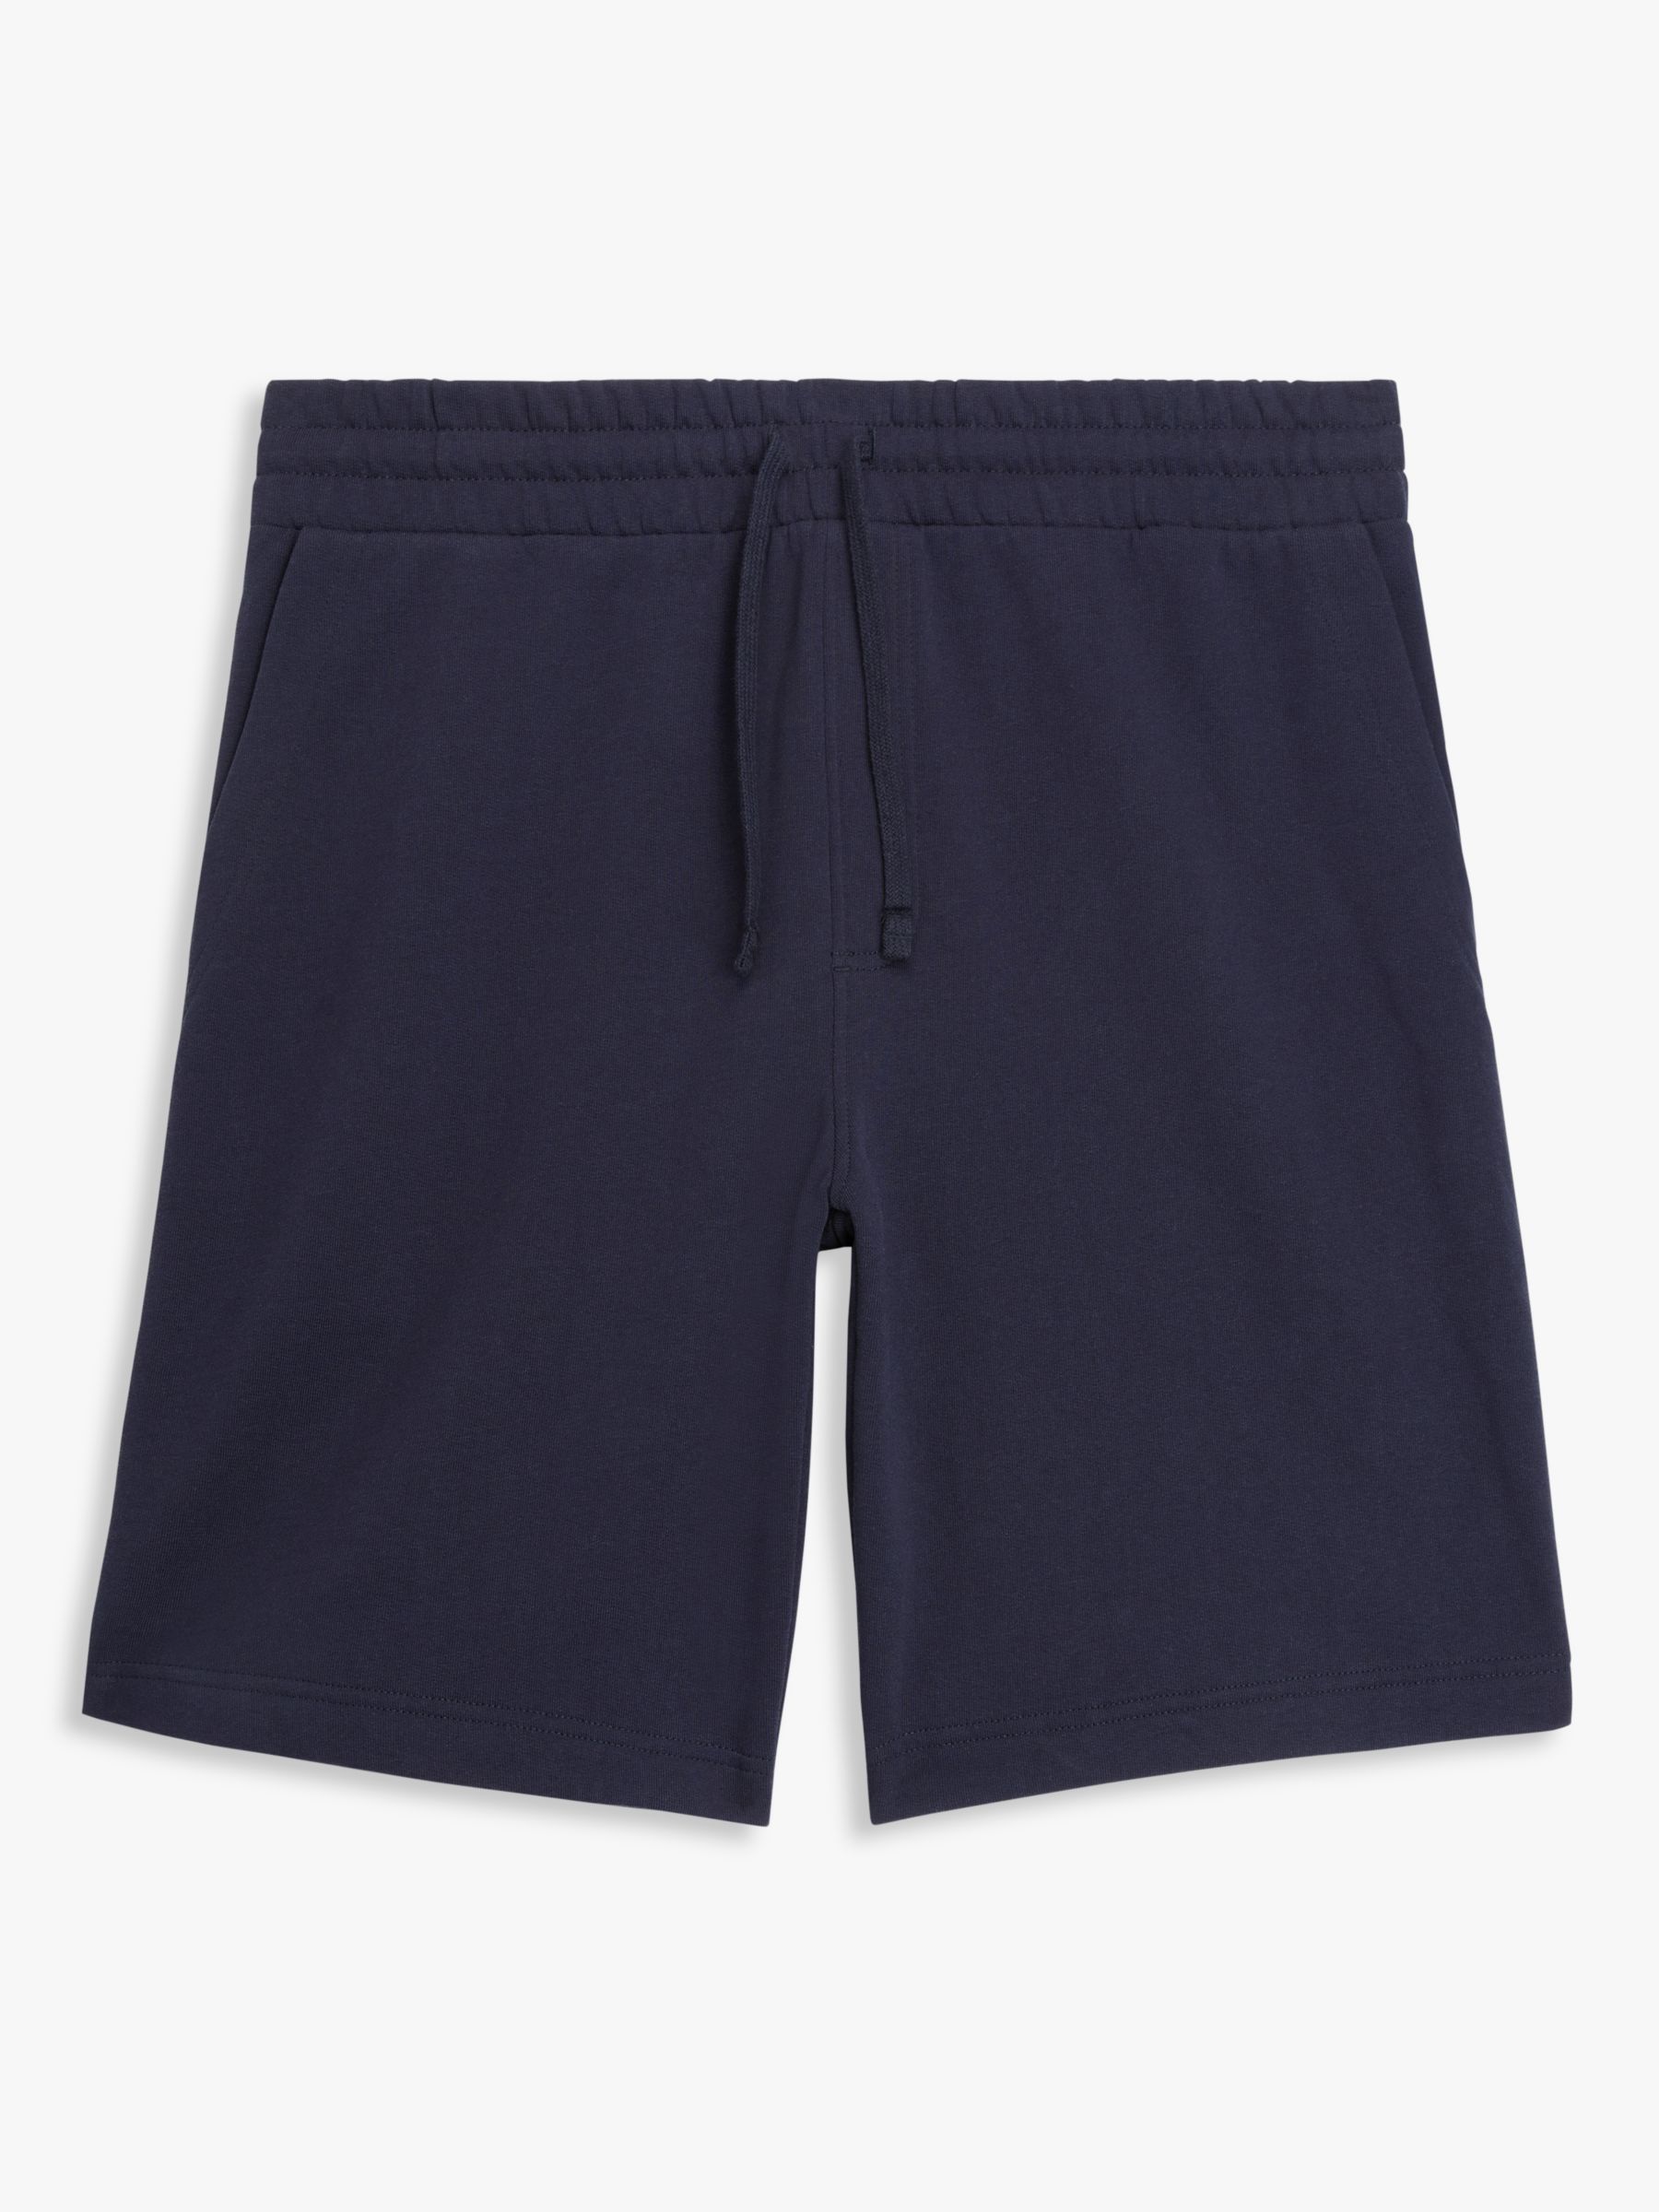 John Lewis ANYDAY Casual Sweat Shorts, Navy, S